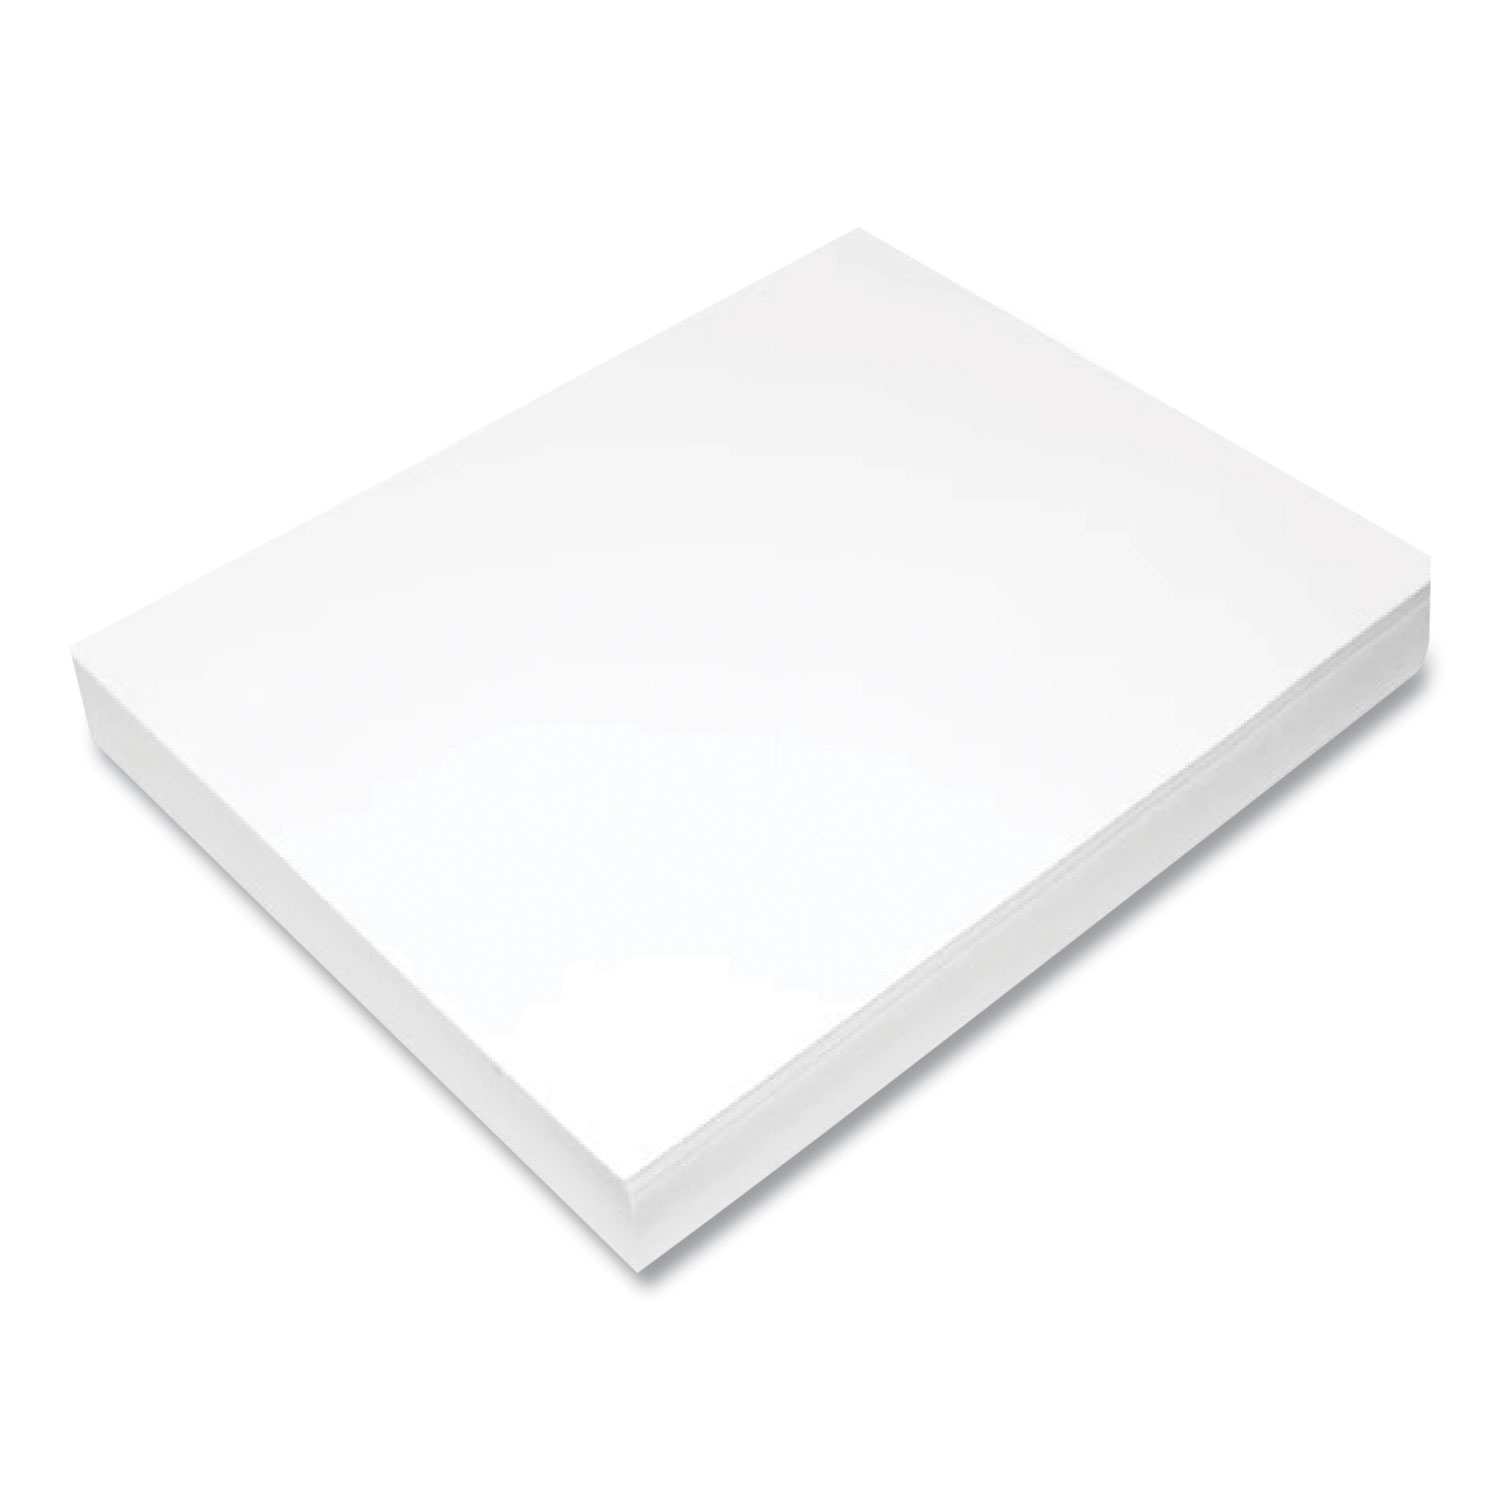 Alpine Smooth Archival Matte Paper 230 gsm 11 x 17 100 Sheets